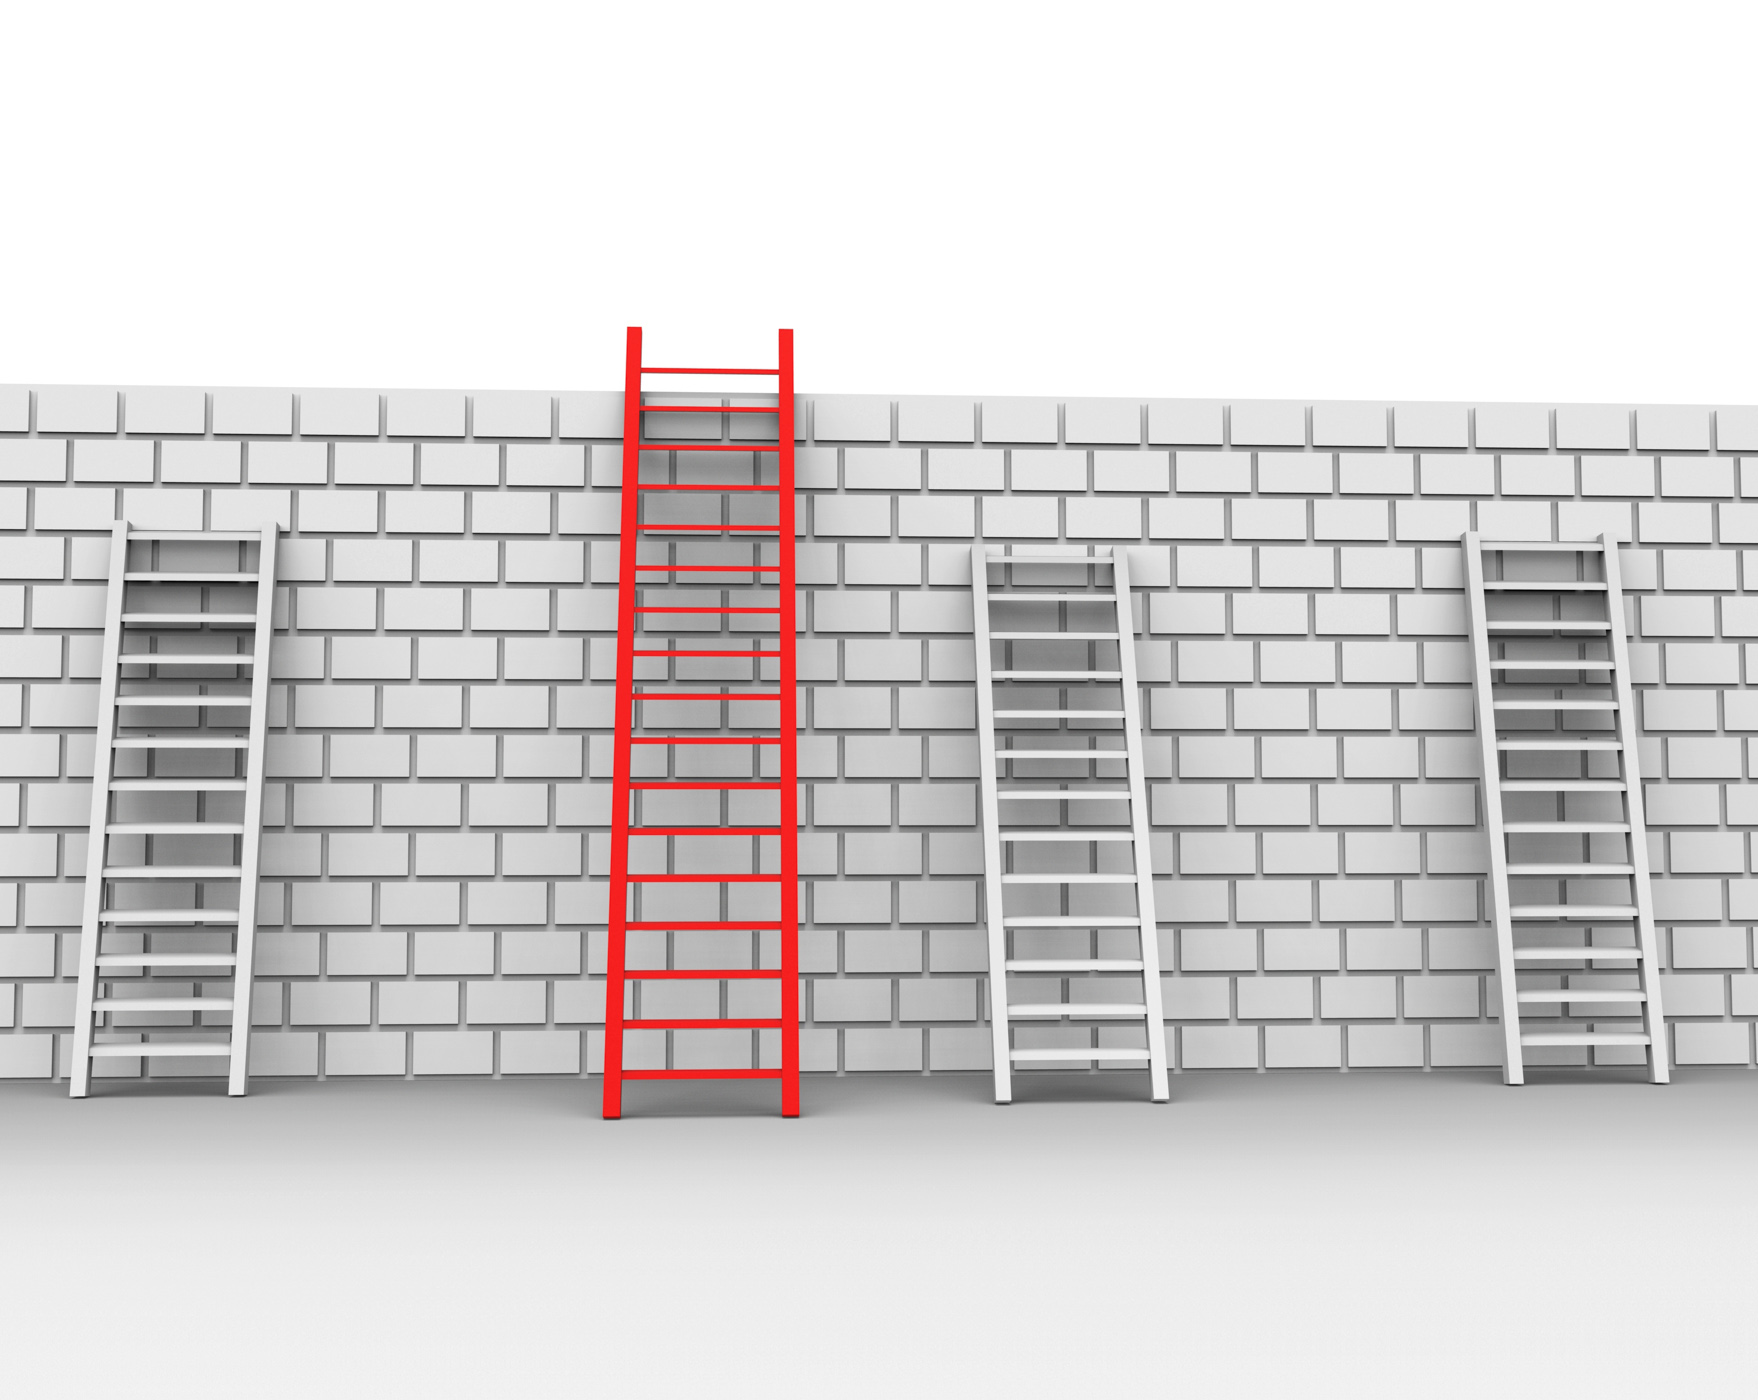 Brick Wall Shows Chalenges Ahead And Brickwall, Barrier, Ladders, Upward, Steps, HQ Photo